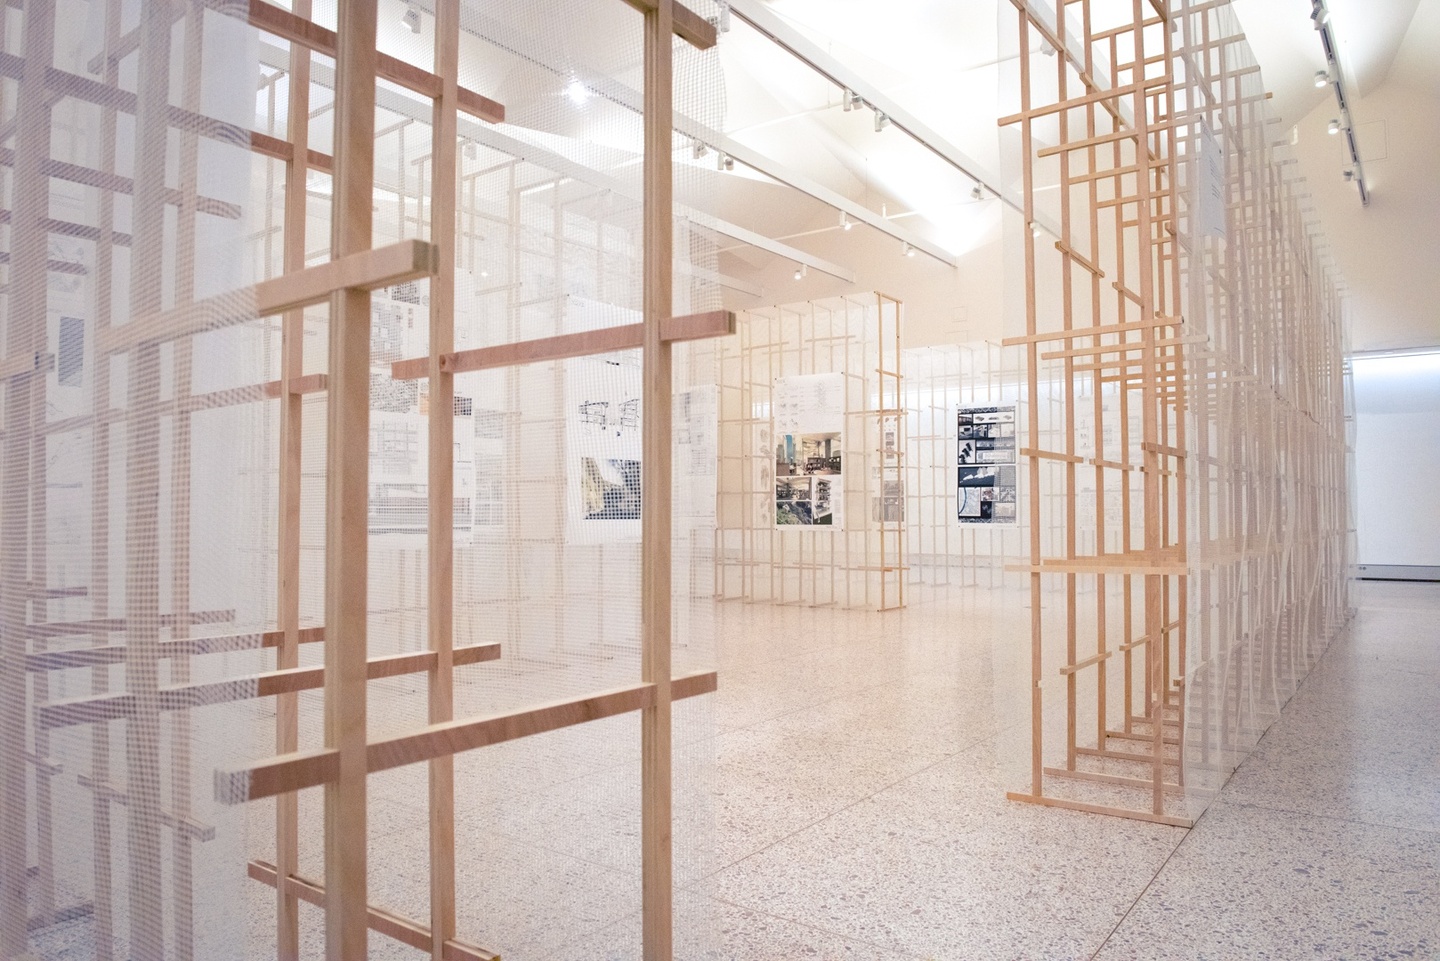 Wooden frameworks built to display prints of architecture student work.